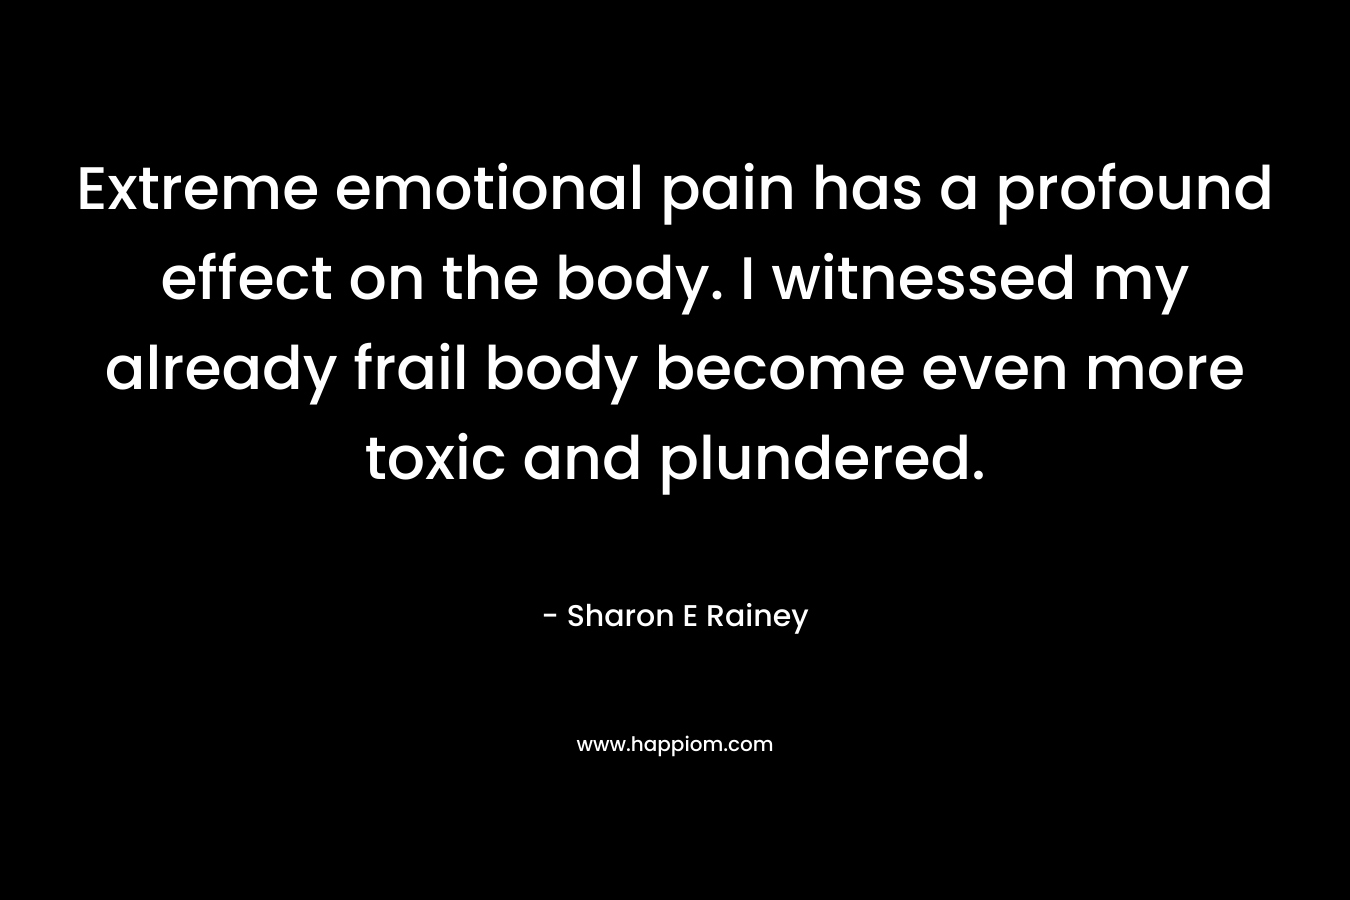 Extreme emotional pain has a profound effect on the body. I witnessed my already frail body become even more toxic and plundered. – Sharon E Rainey